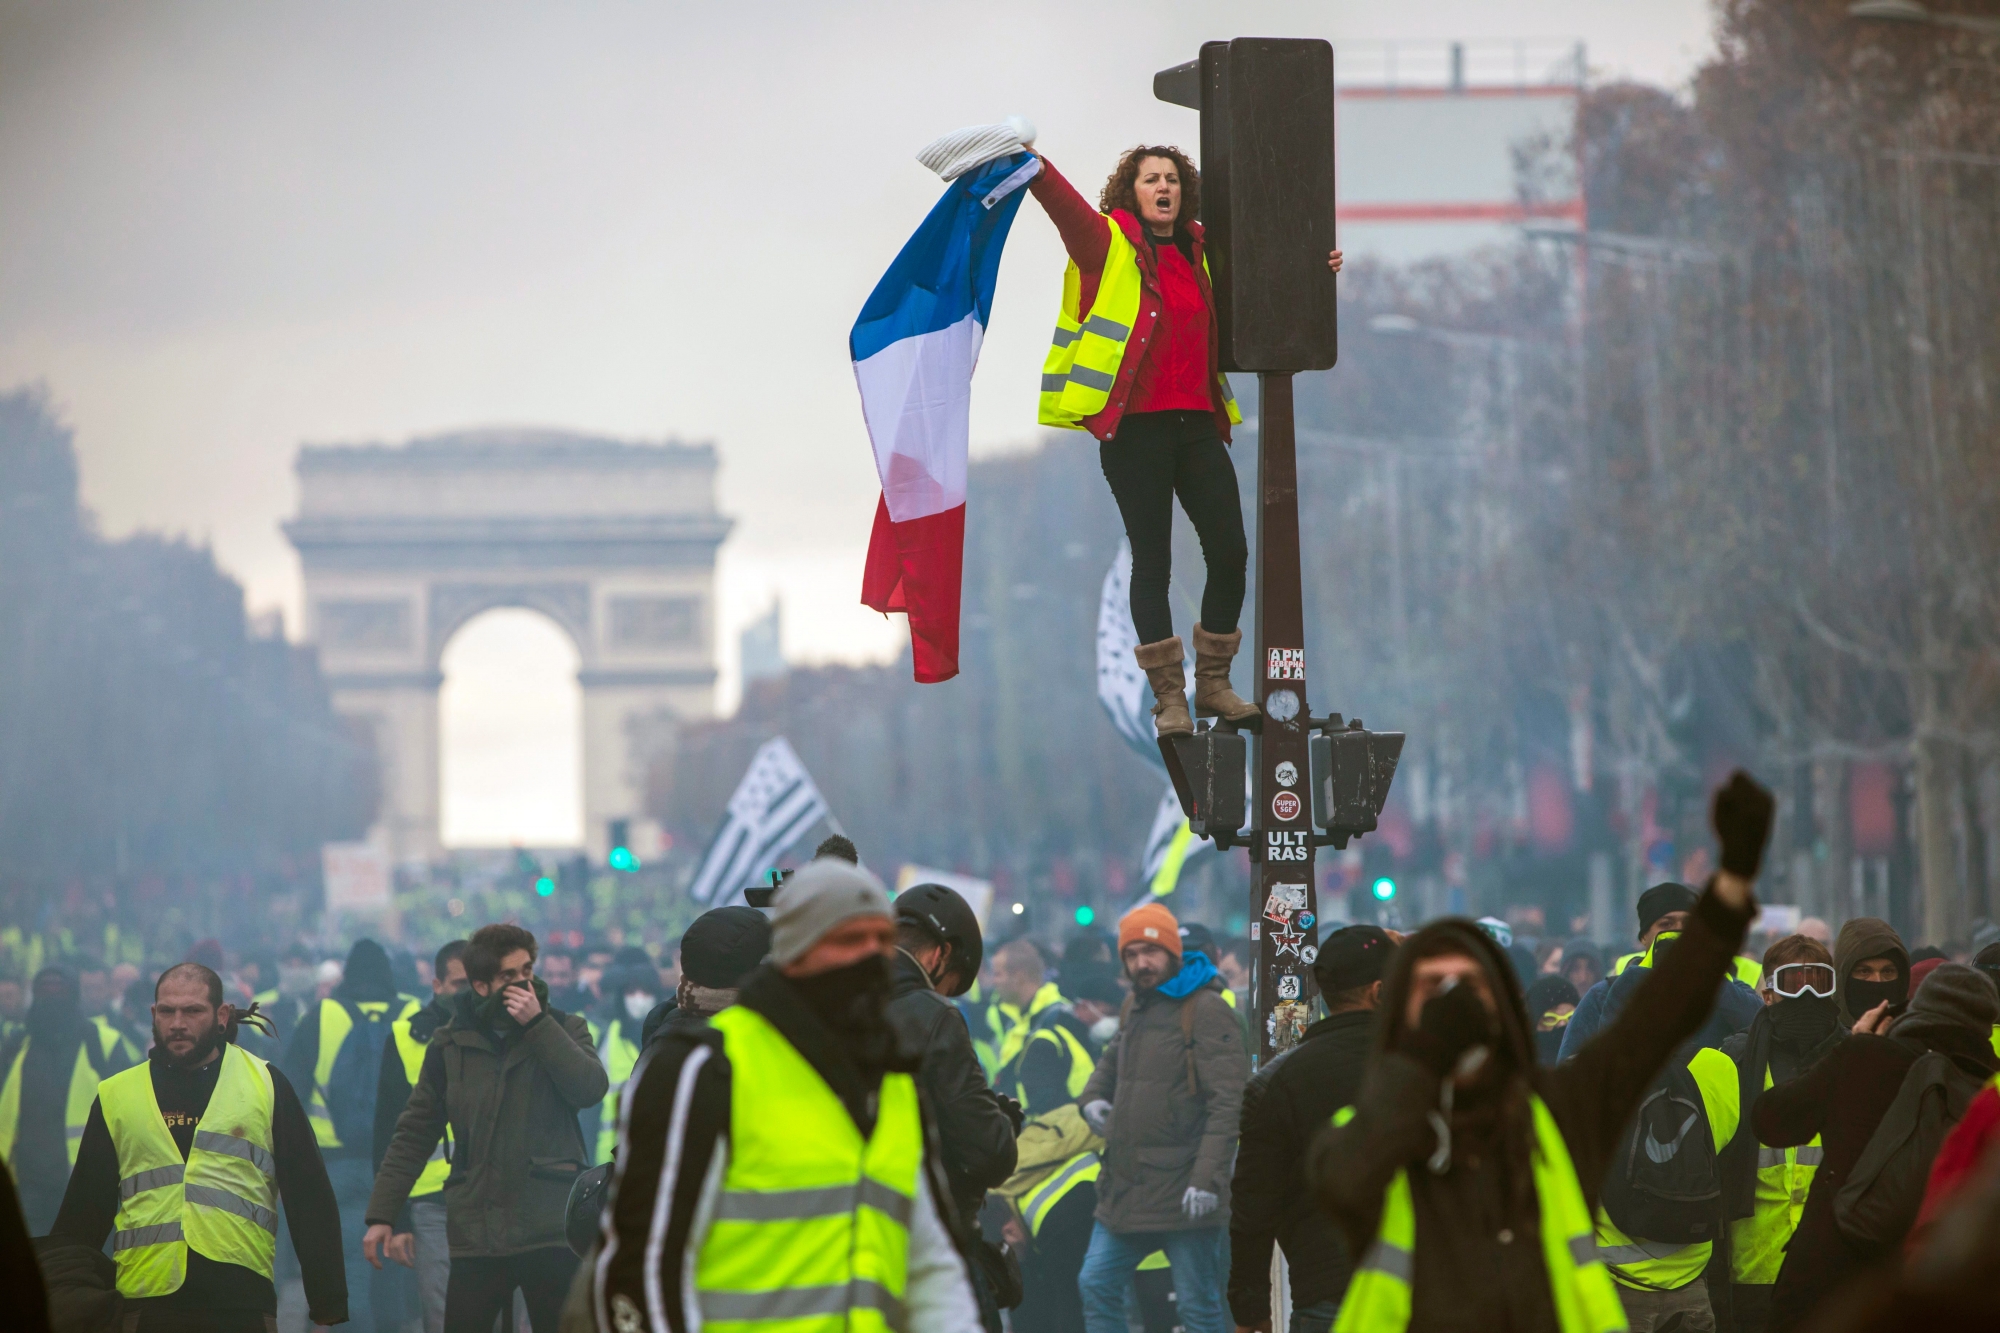 epa07186248 A woman wearing a yellow vest, as a symbol of French driver's and citizen's protest against higher fuel prices, waves a French flag during clashes with police forces on the Champs Elysee as part of a nationwide protest in Paris, France, 24 November 2018. The so-called 'gilets jaunes' (yellow vests) protest movement, which has reportedly no political affiliation, is protesting over fuel prices.  EPA/CHRISTOPHE PETIT TESSON FRANCE FUEL TAXES PROTEST